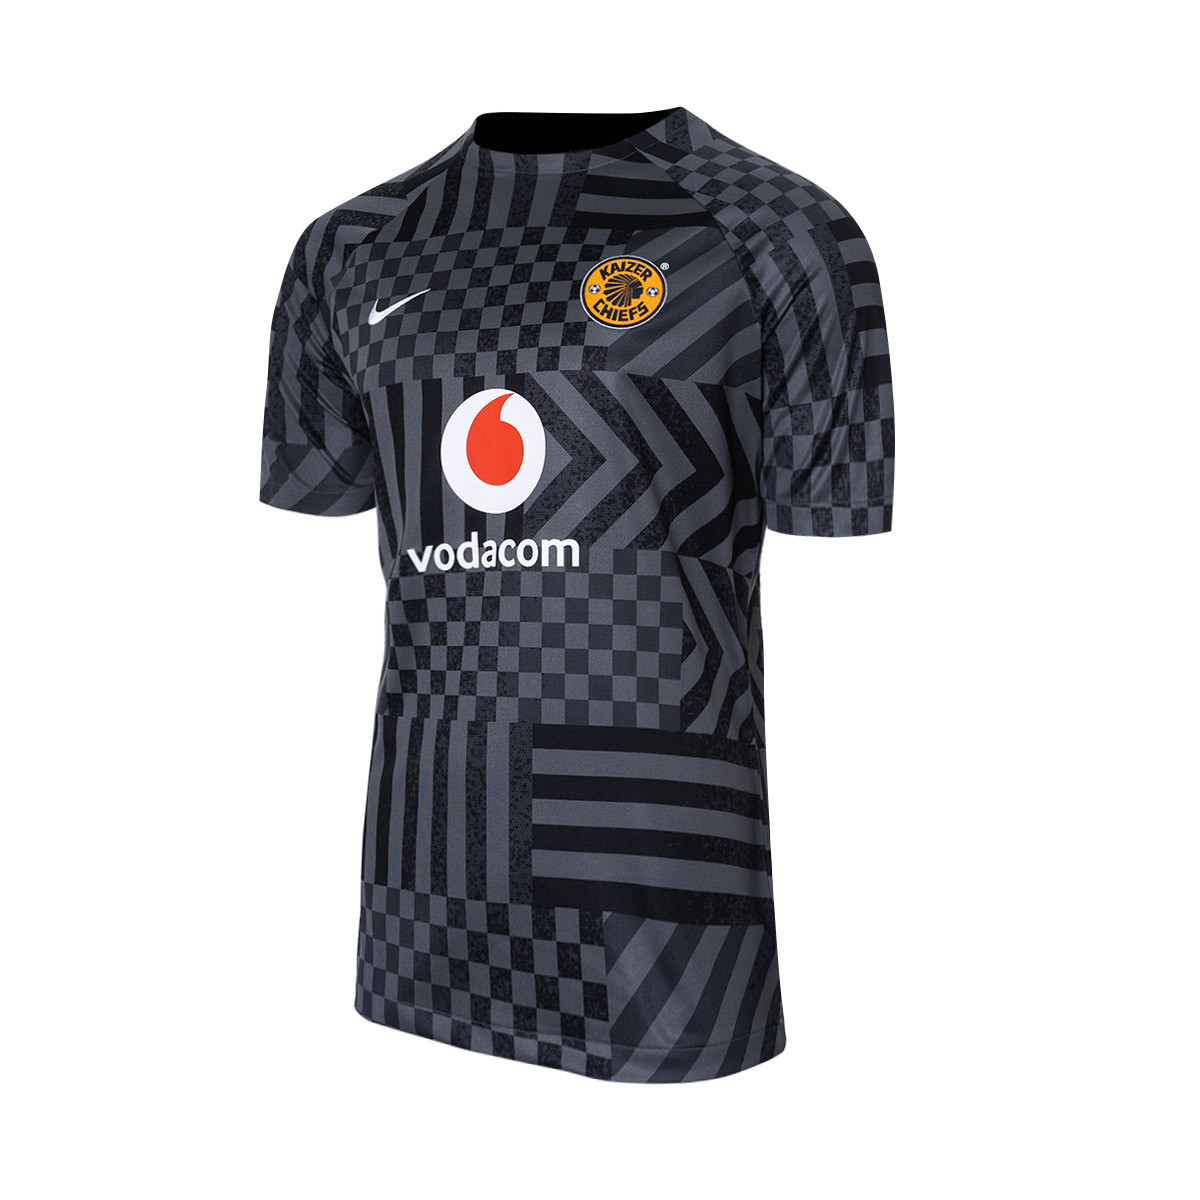 No More Nike - Kaizer Chiefs Back In Training in New Kappa Gear - Footy  Headlines